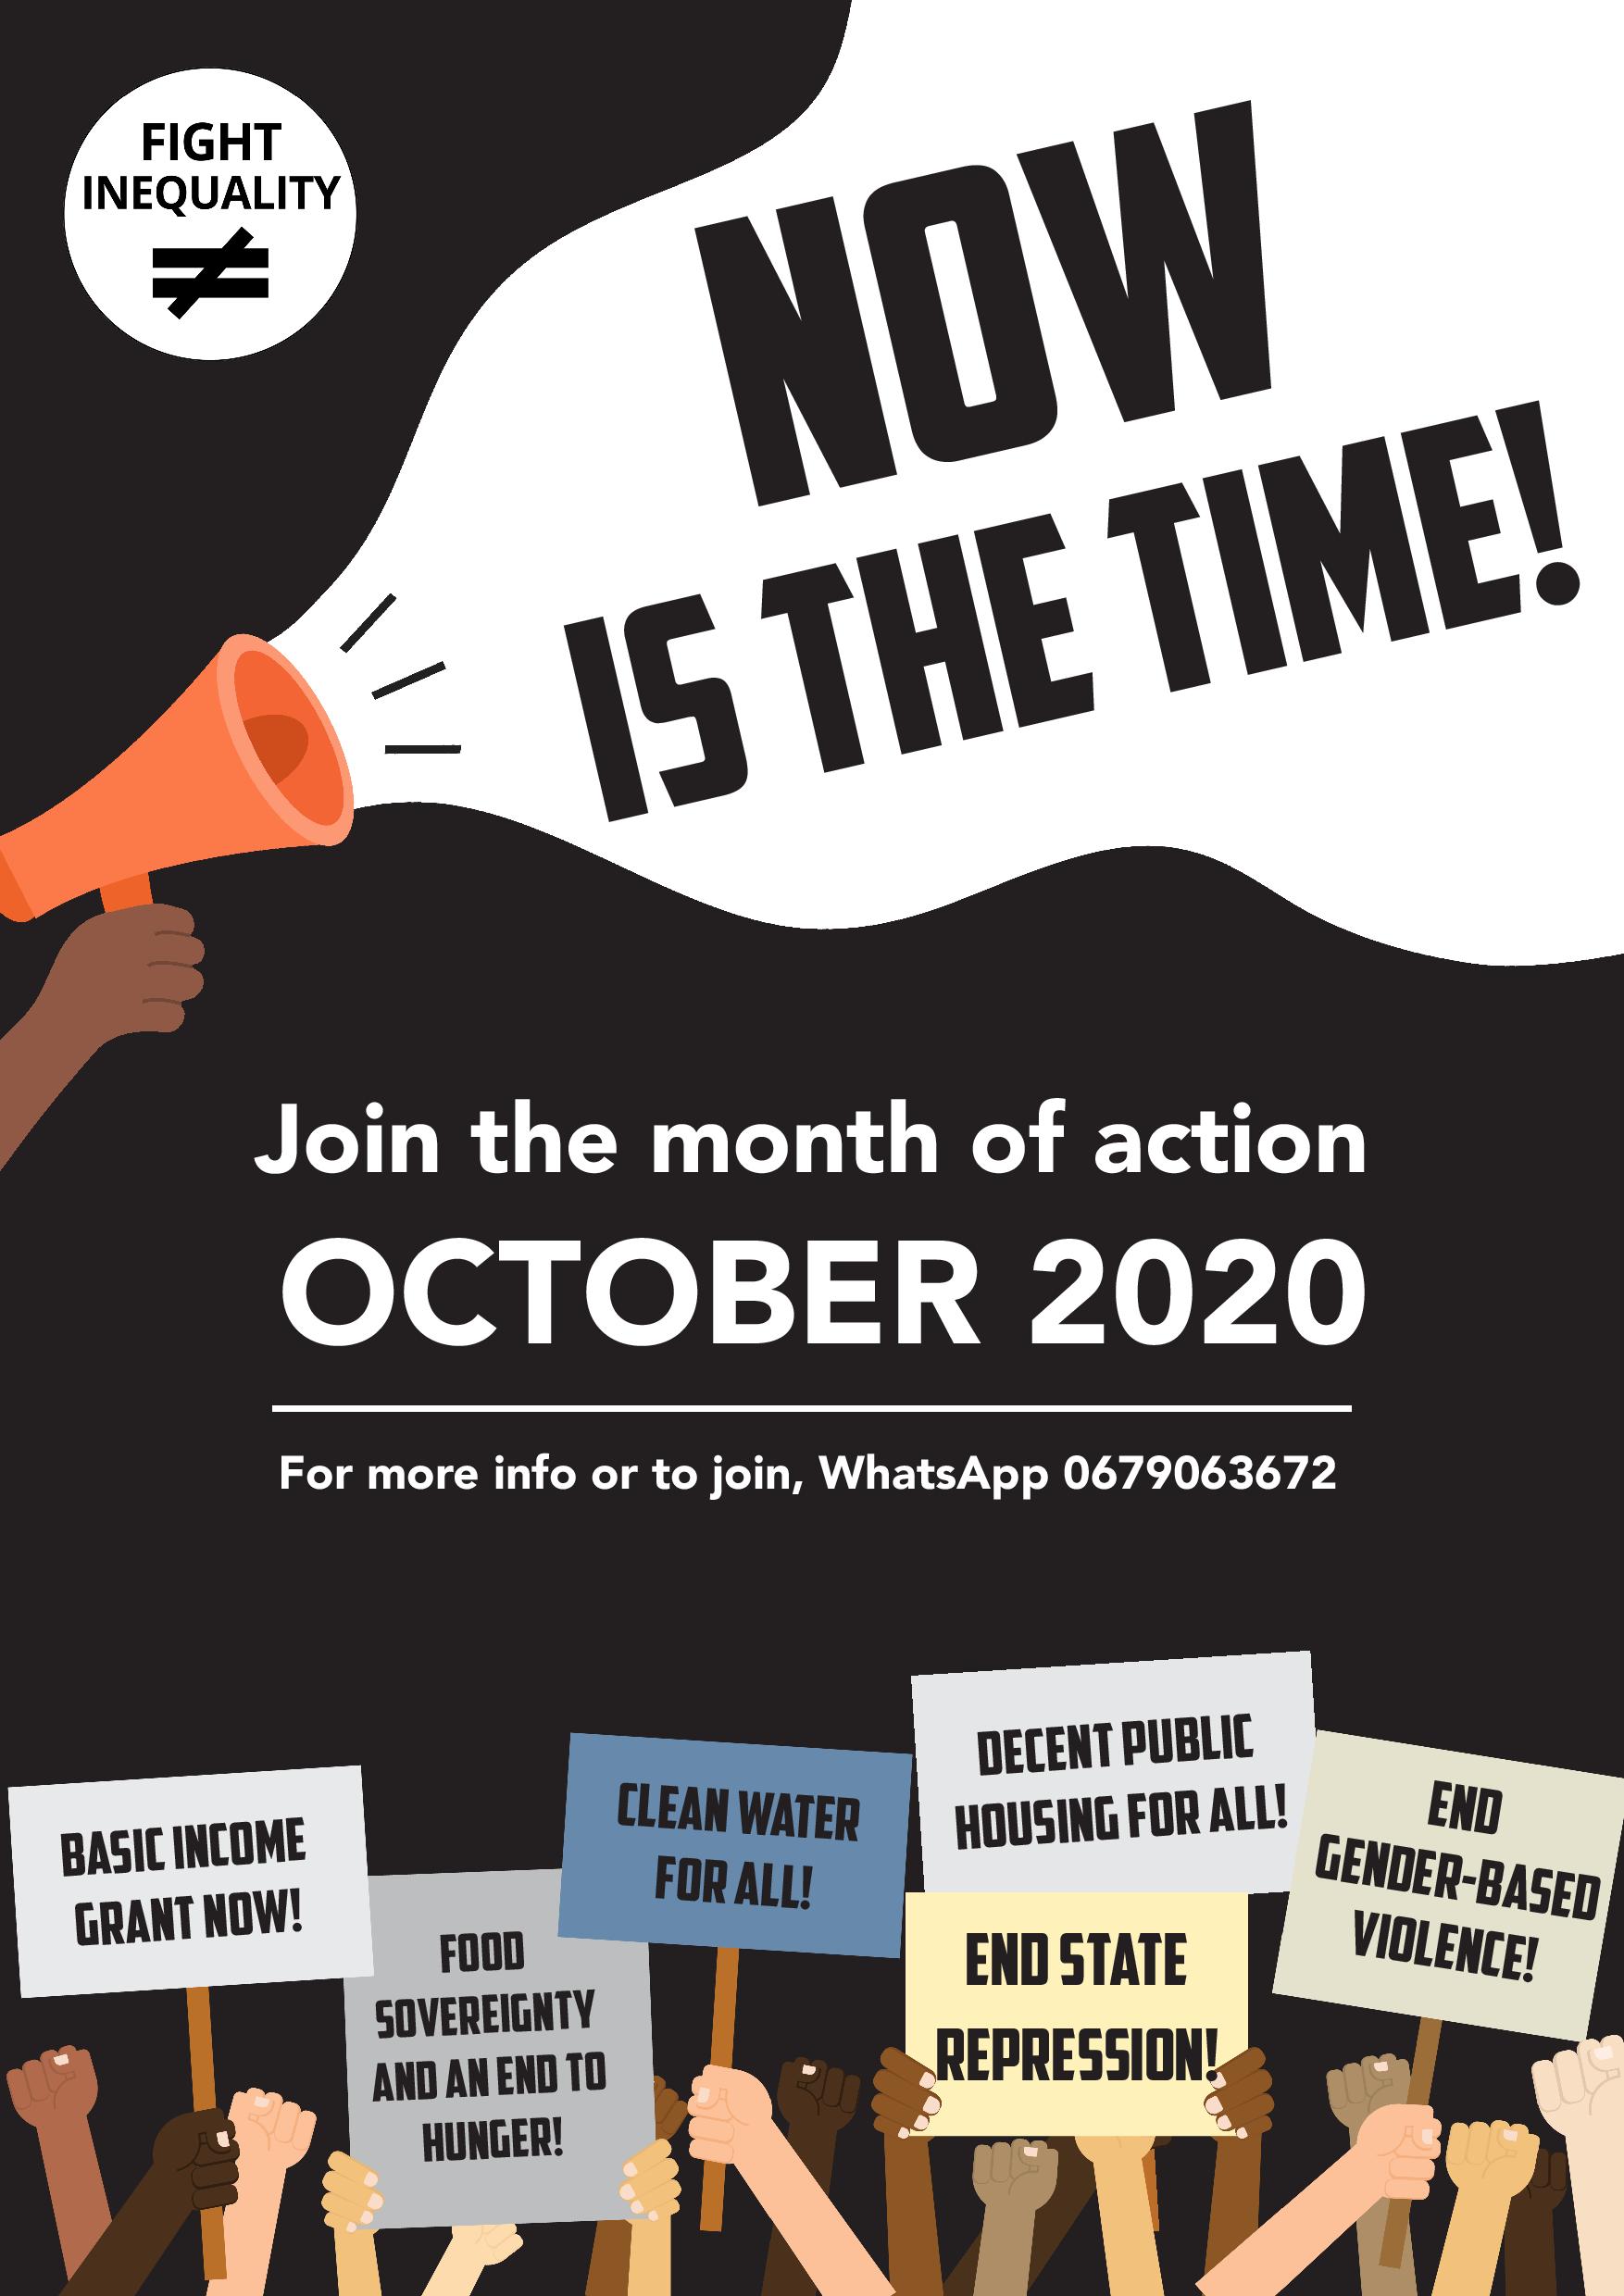 The Fight Inequality Alliance SA Marks October as a Month of Action 